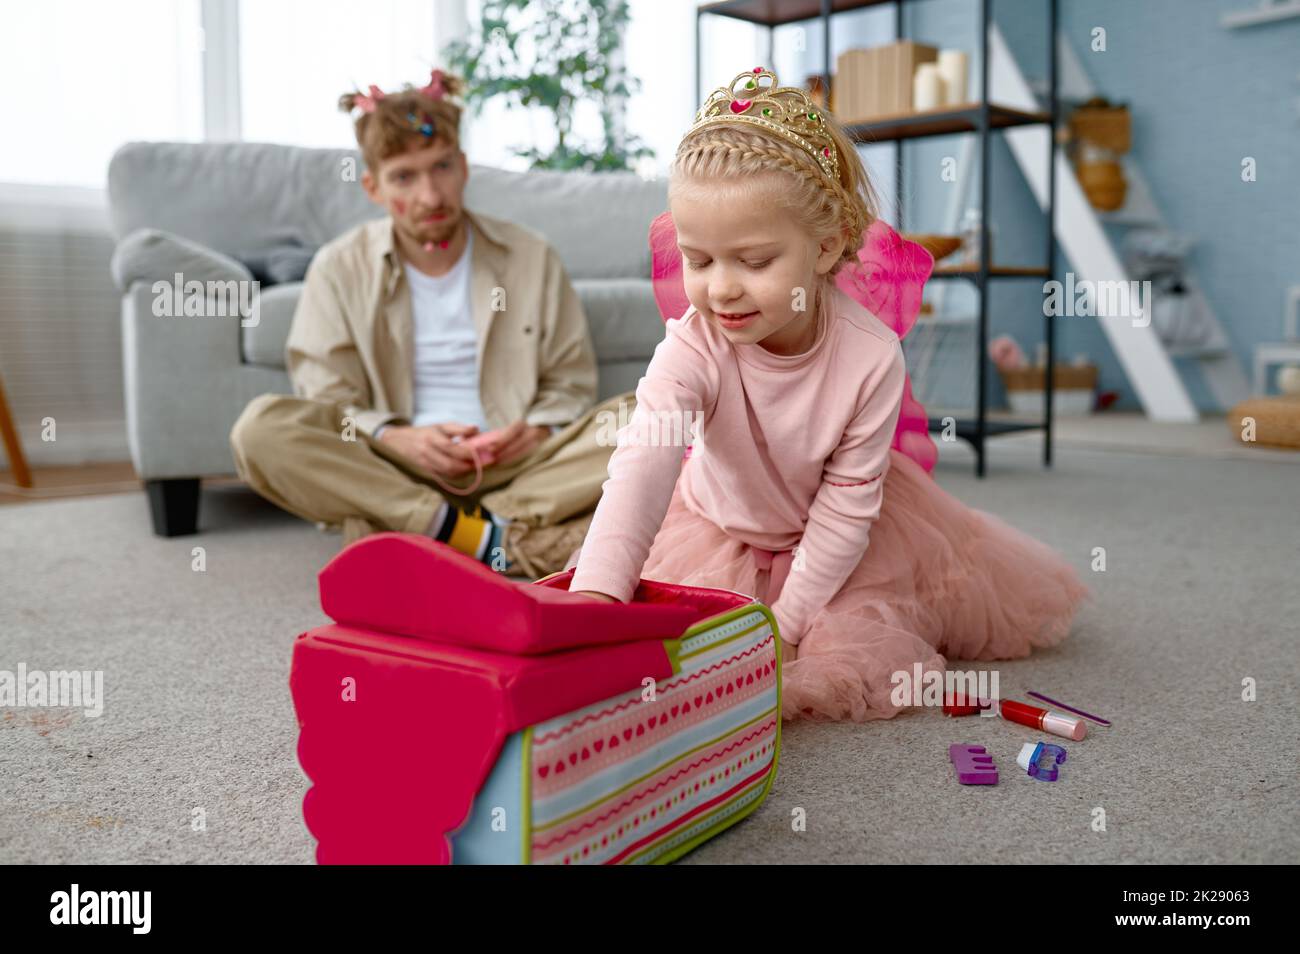 Father and daughter wearing fairies costume having fun Stock Photo